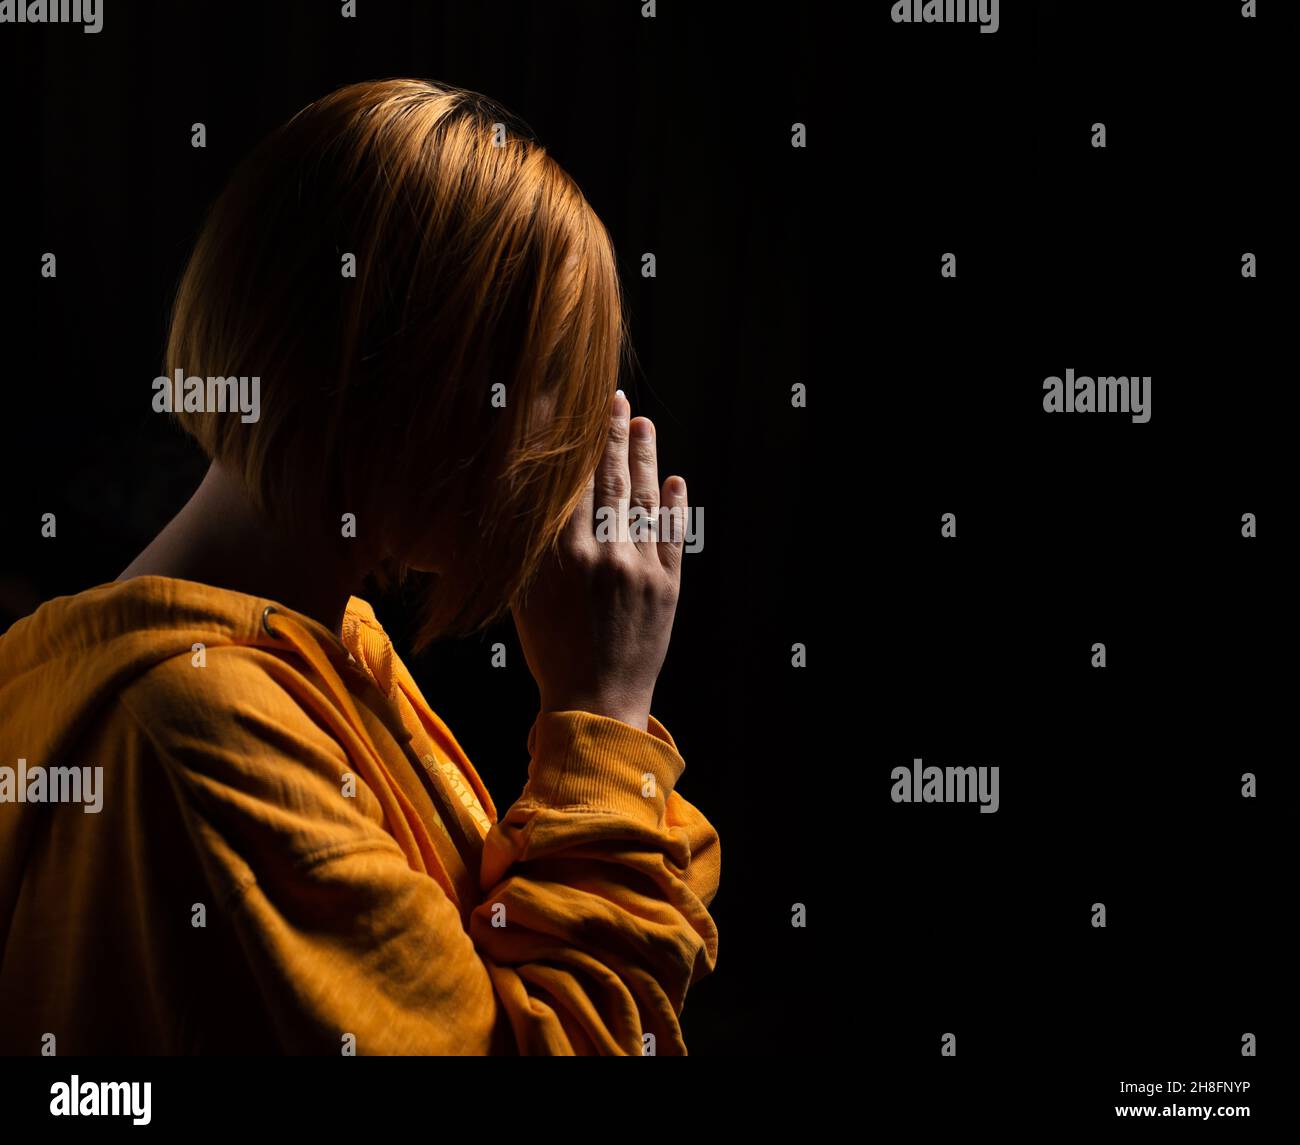 Woman praying with her head bowed with folded palms on a black background. Stock Photo